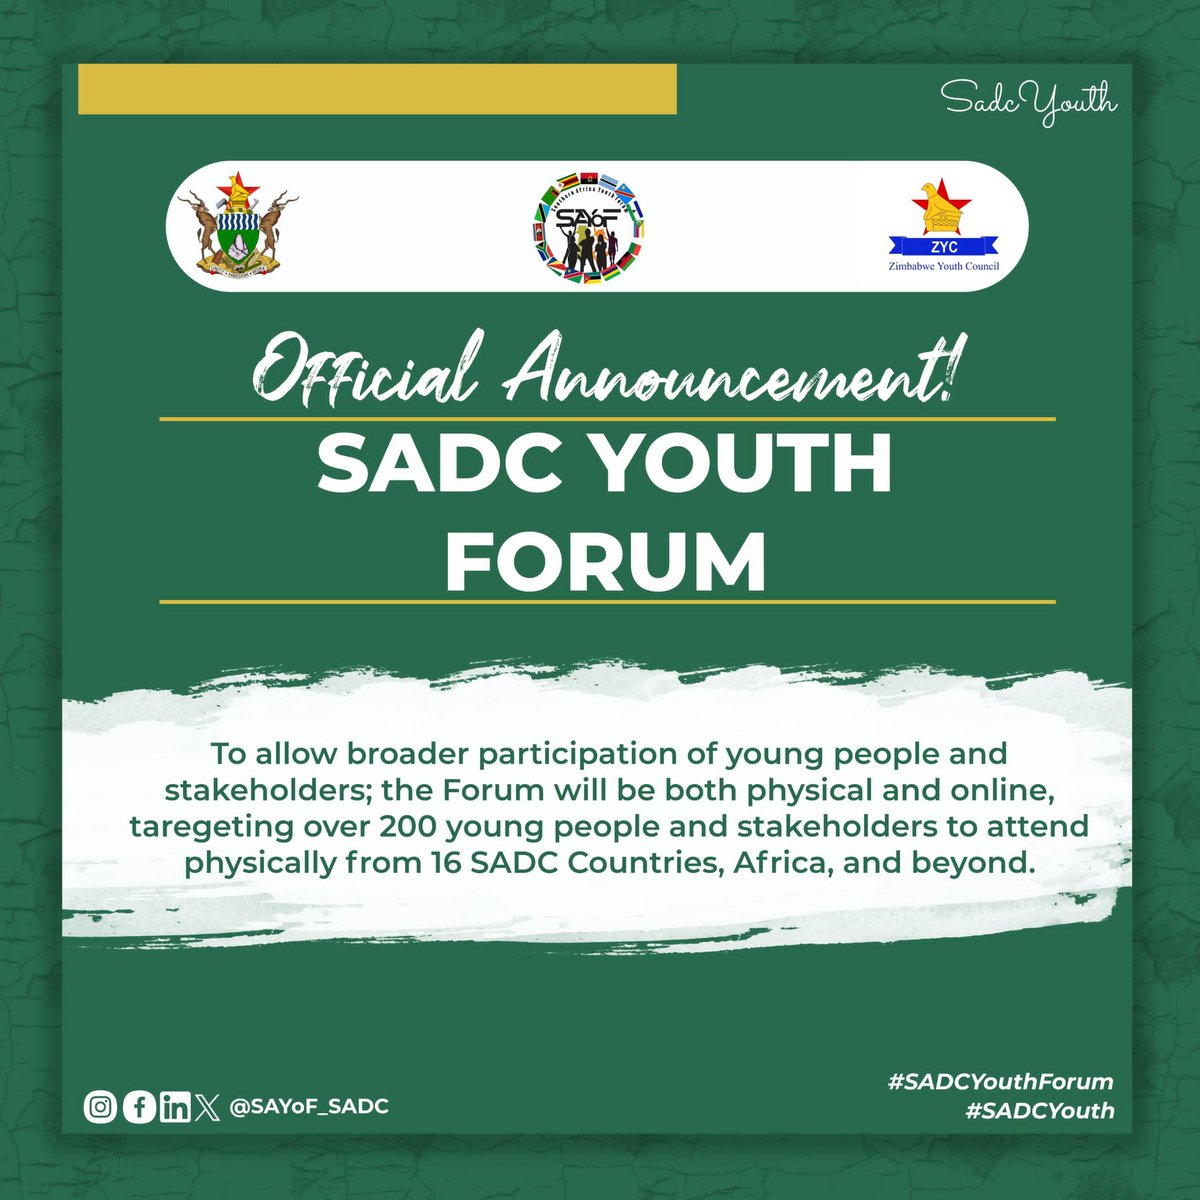 To allow broader participation of young people and stakeholders; the Forum will be both physical and online, targeting over 200 young people and stakeholders to attend physically from 16 SADC Countries, Africa, and beyond. #SADCYouth #SADCYouthForum